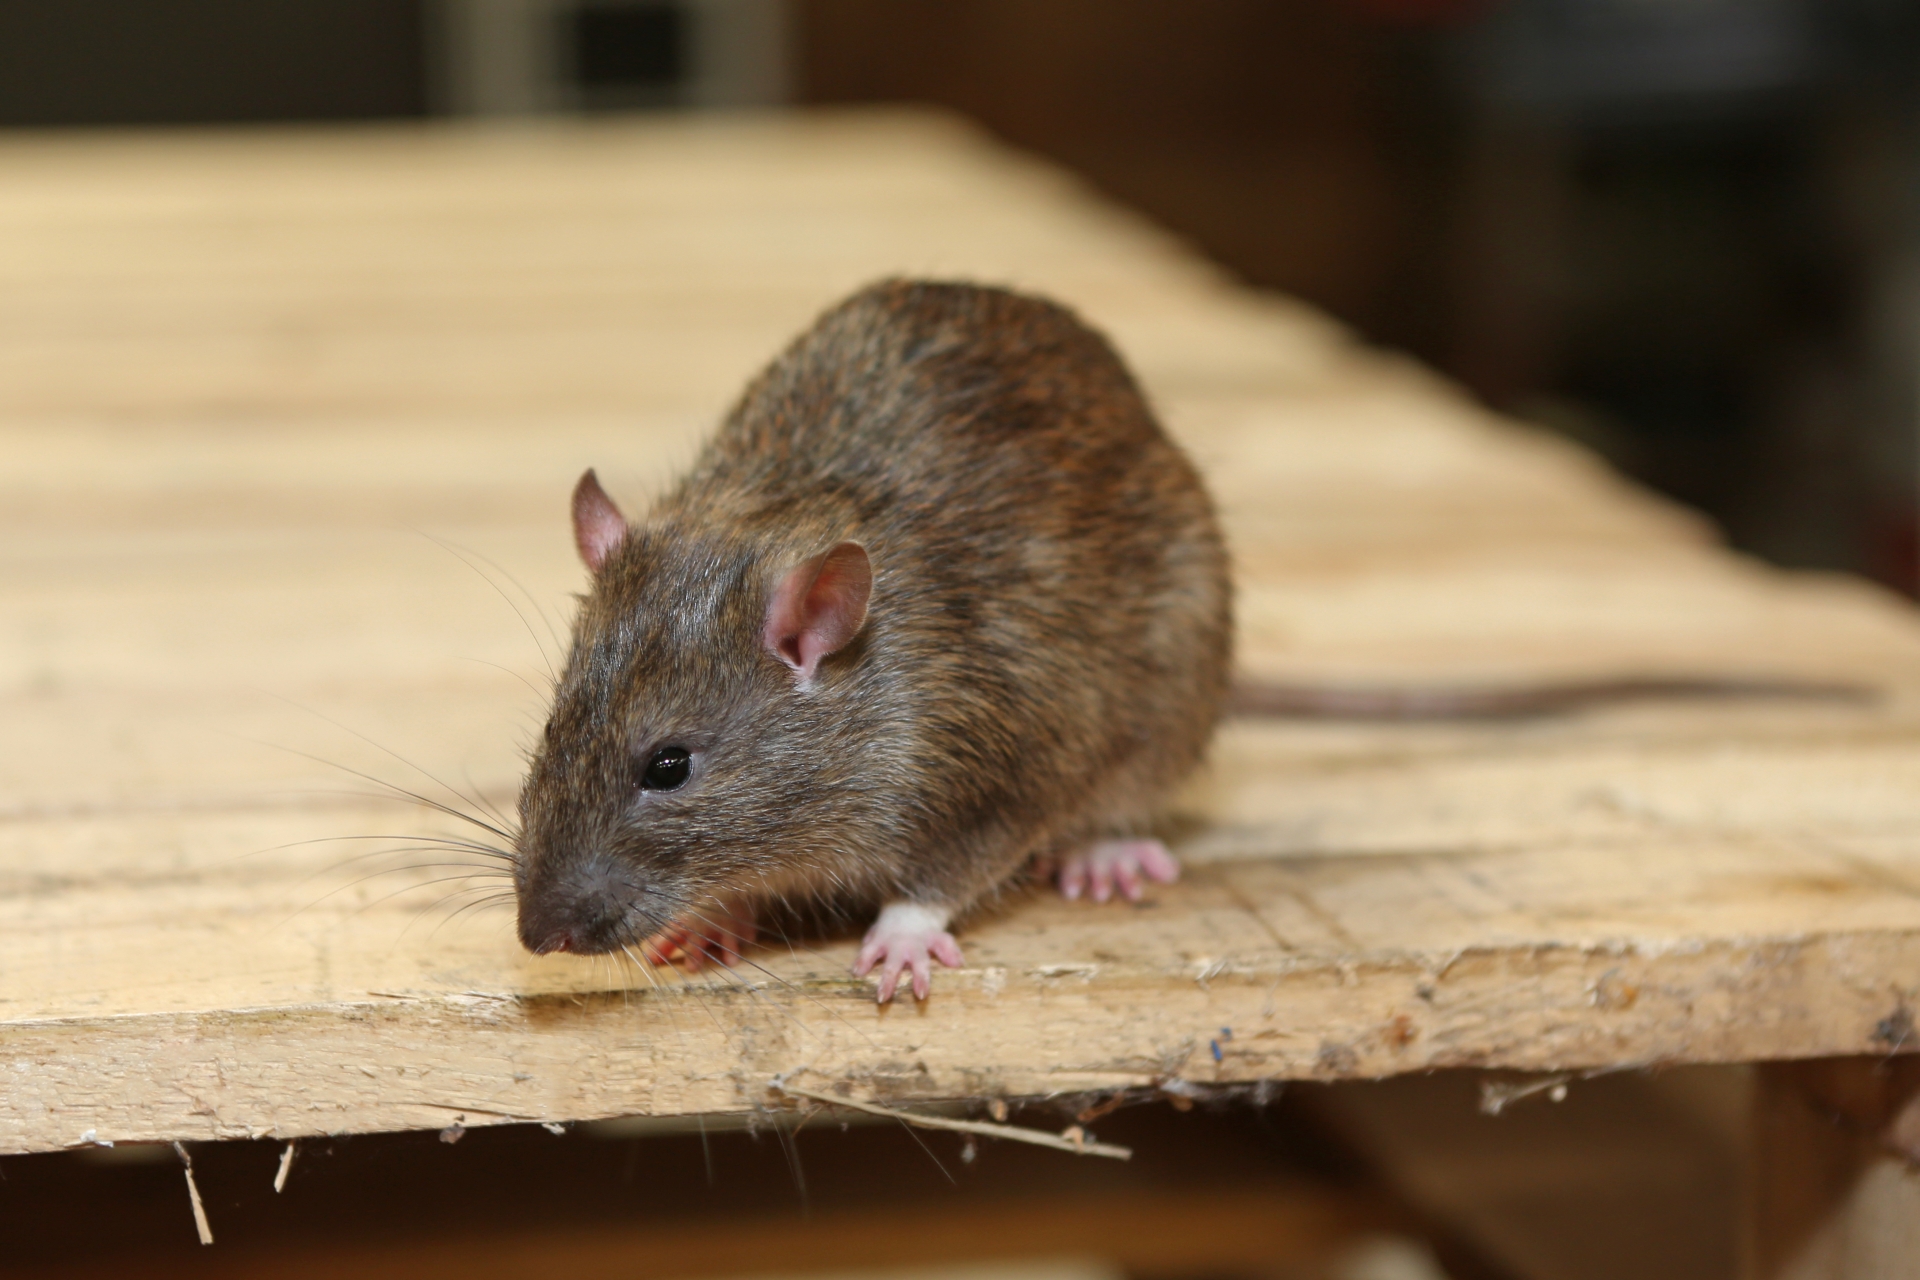 Rat Control, Pest Control in Ealing, W5. Call Now 020 8166 9746